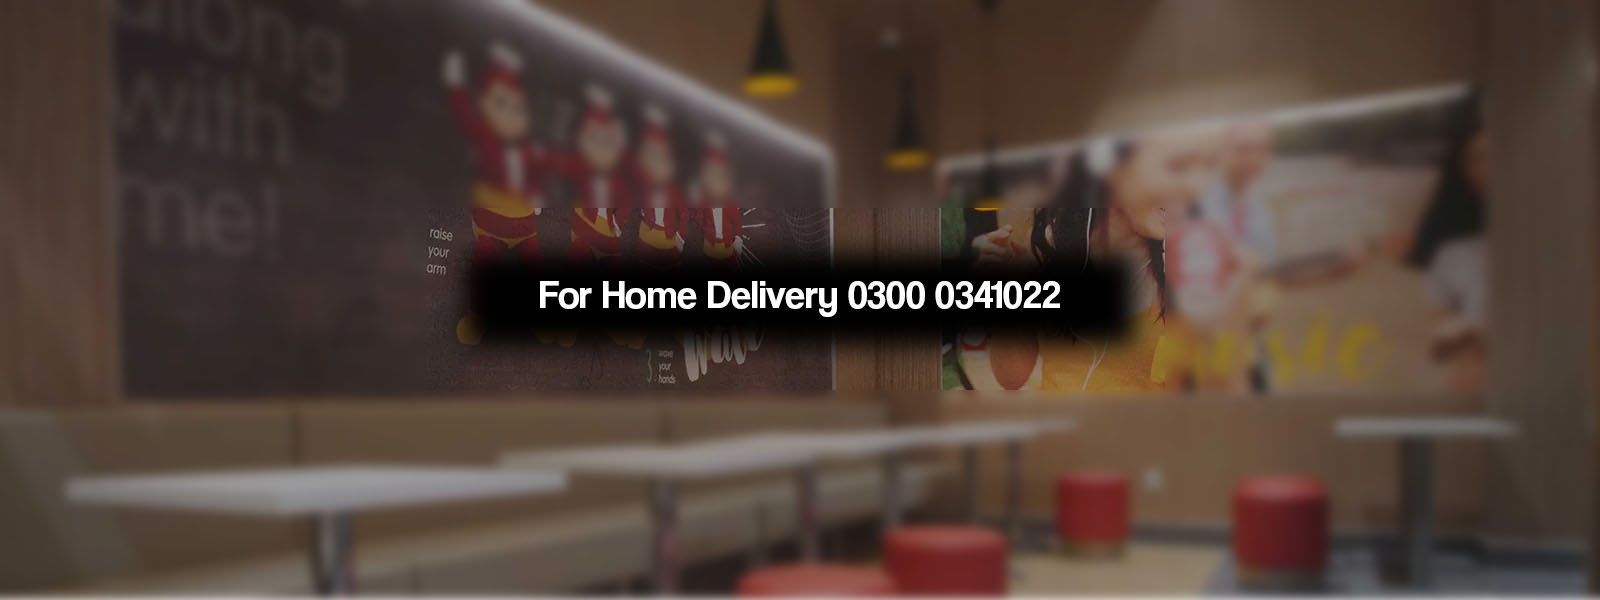 pizza-school-fast-food-faisalabad-to-order-call-0300-0341022